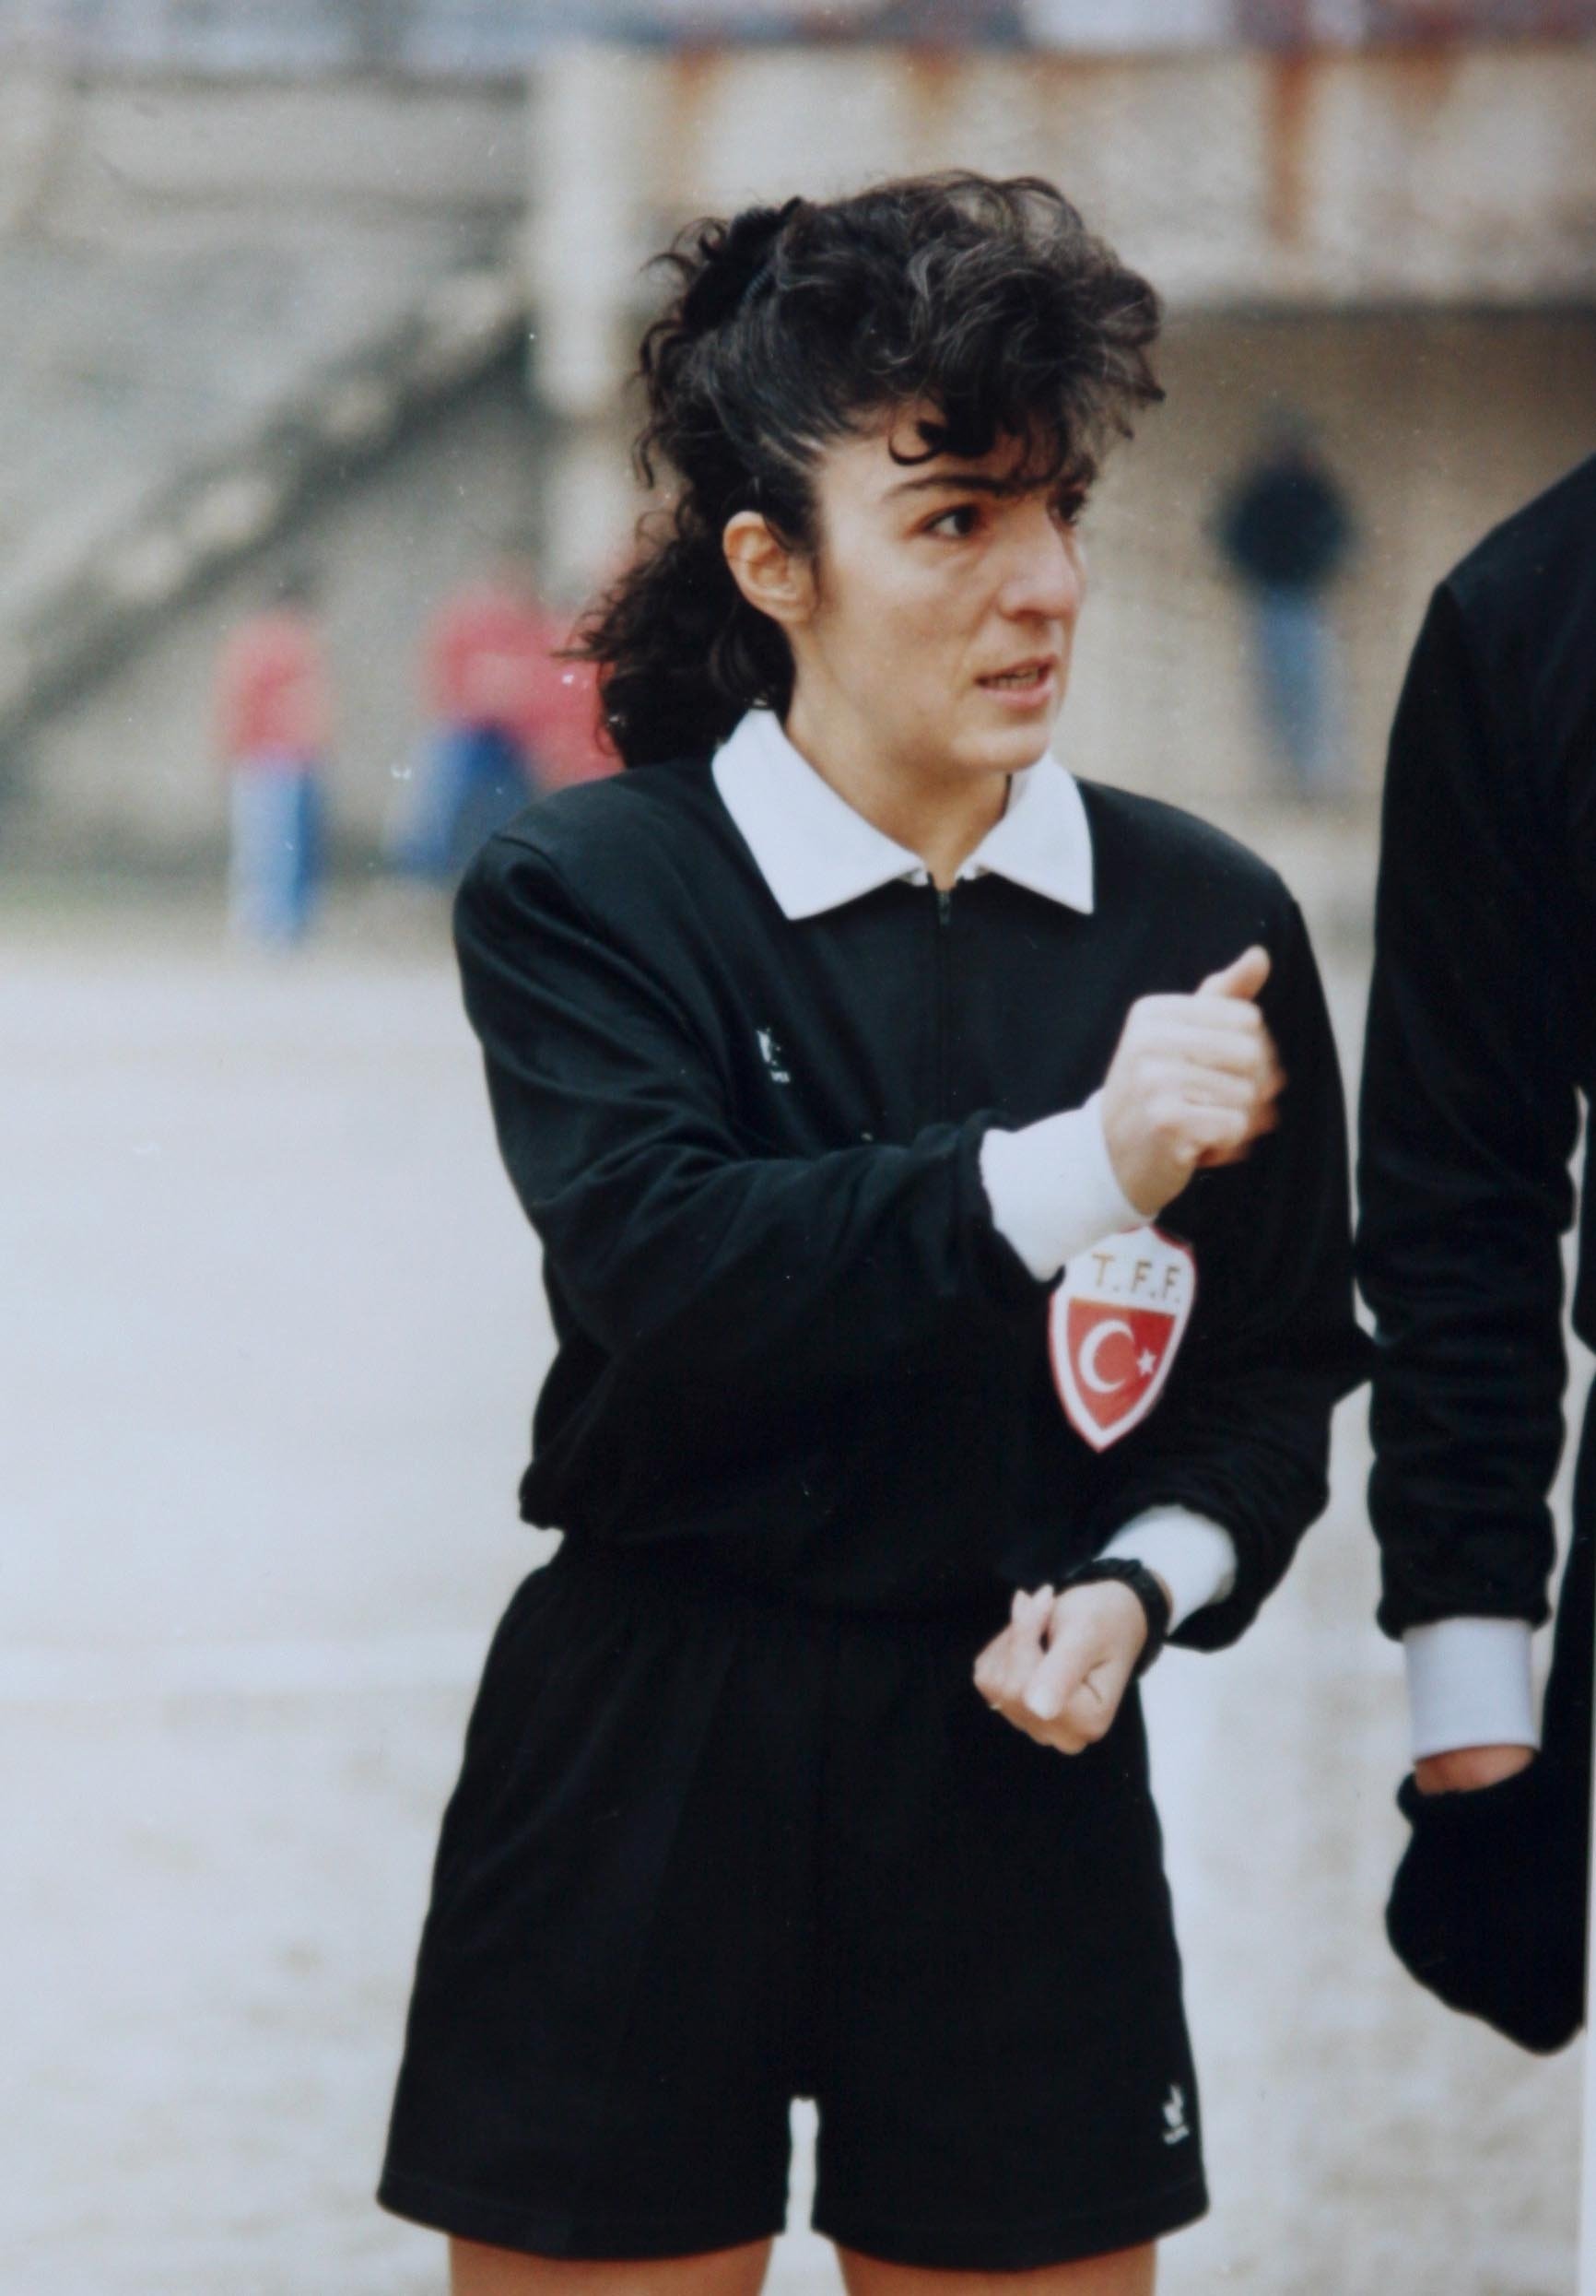 An undated photo of Lale Orta as a Turkish Football Federation (TFF) referee. (Sabah File Photo)